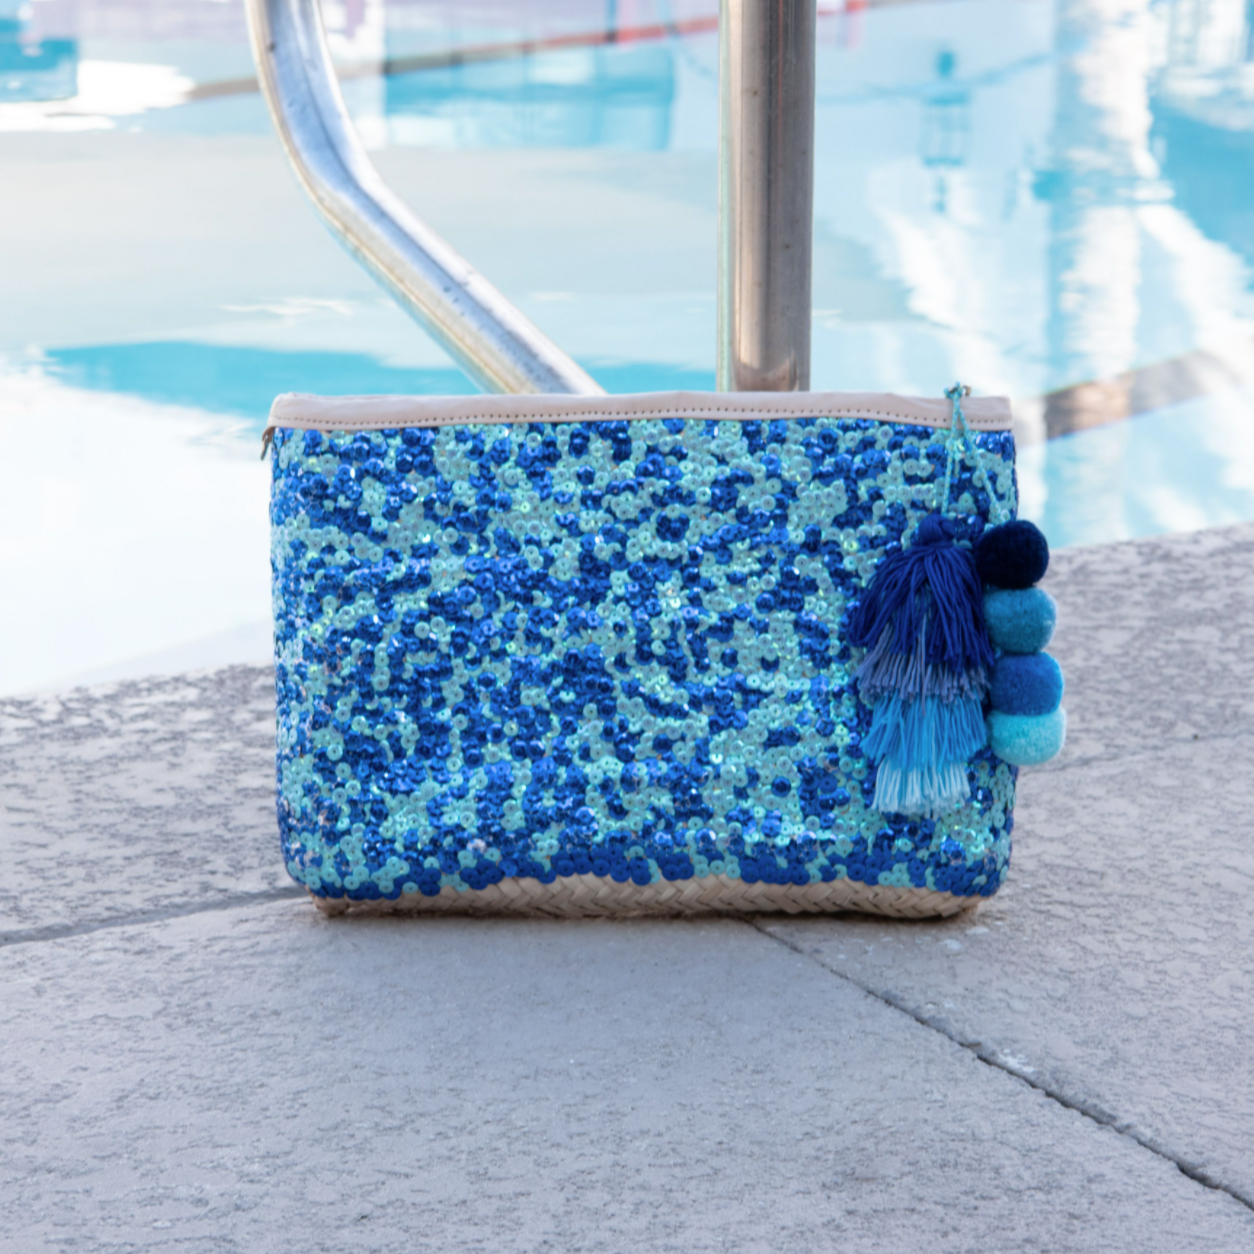 Straw clutch with blue sequins sitting next to a pool